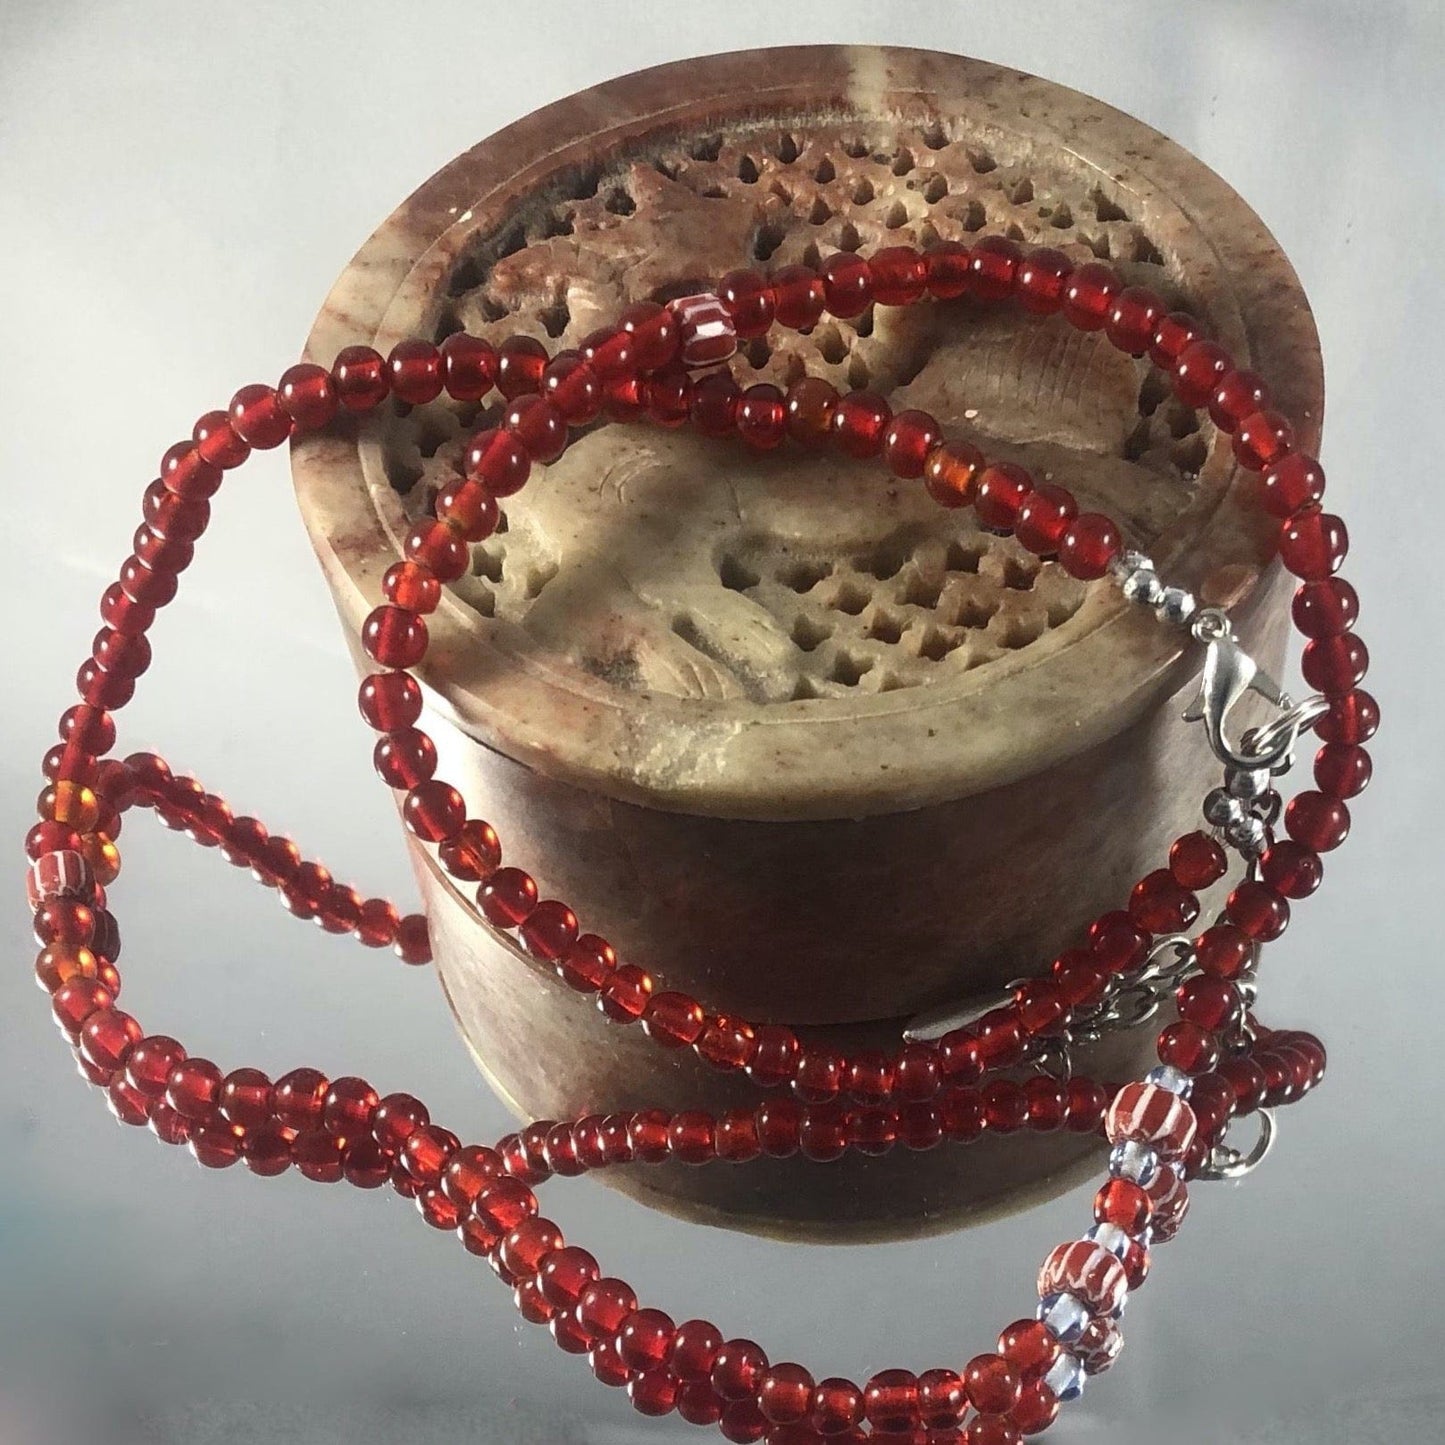 Red Glass Beaded Necklace KAS WARWAS